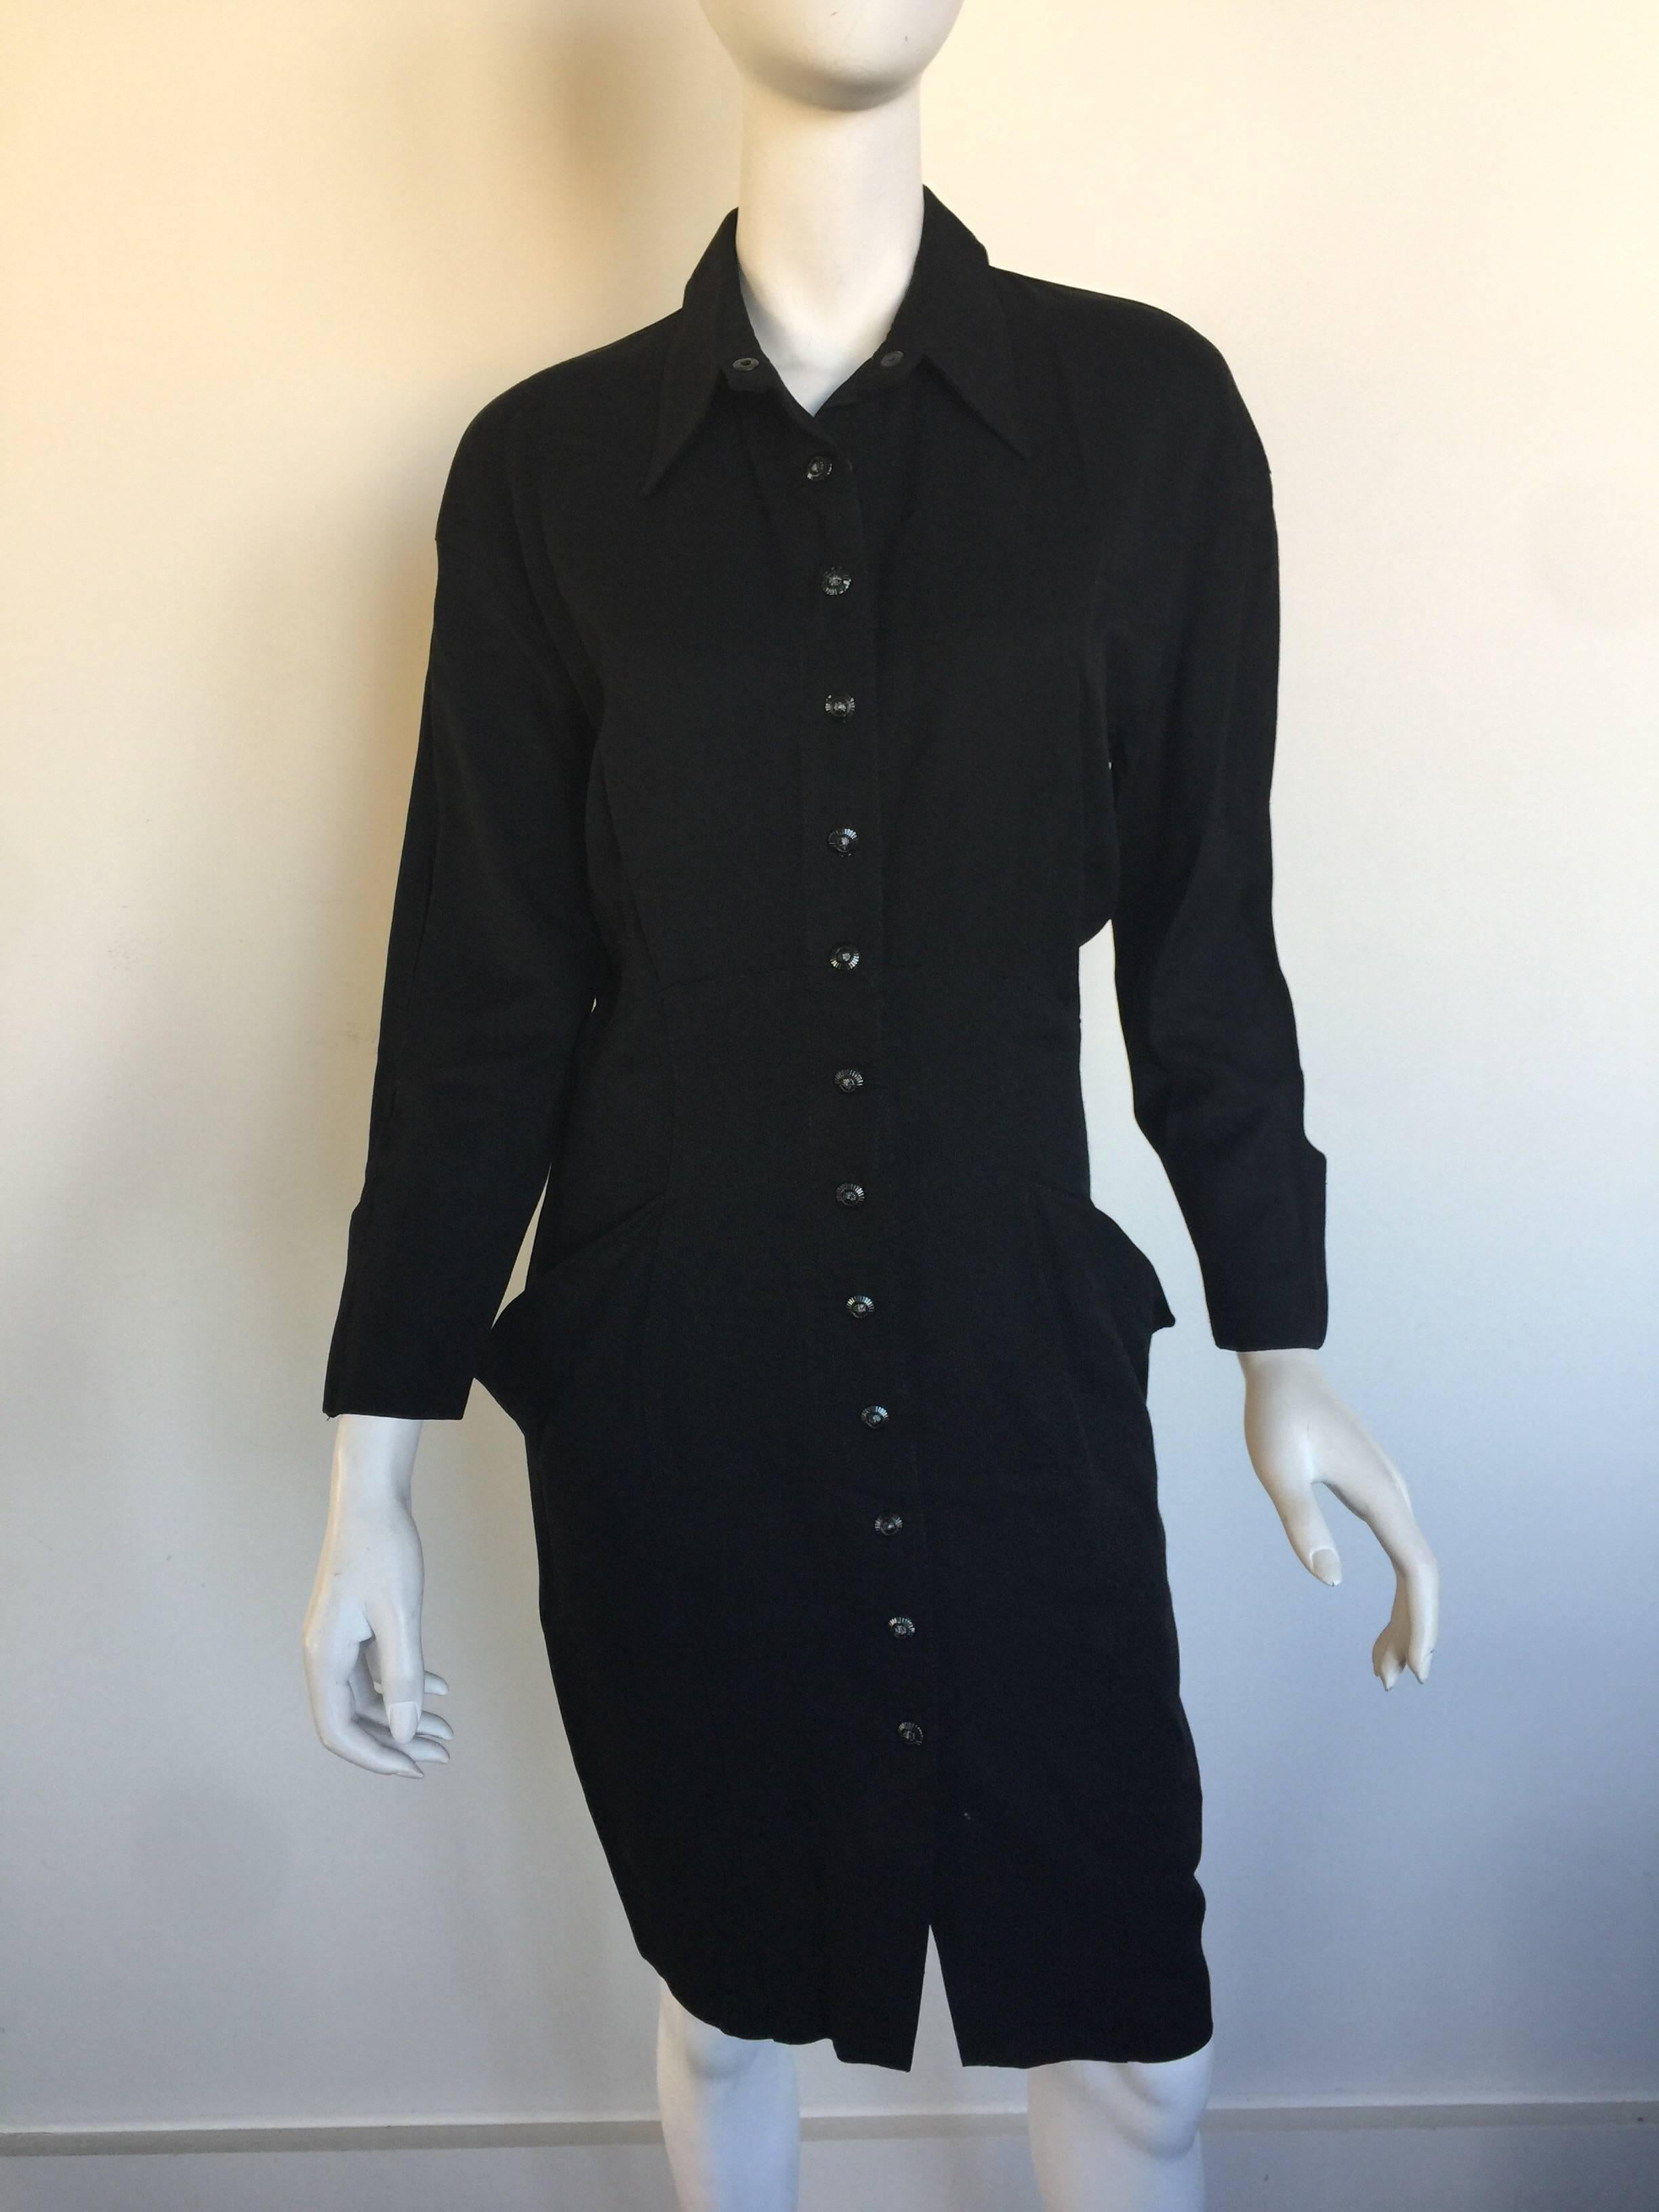 This black tailored Thierry Mugler dress is from the early 90s. This tailored shirt dress is wool gabardine and has front snap closures, from the neck to 8